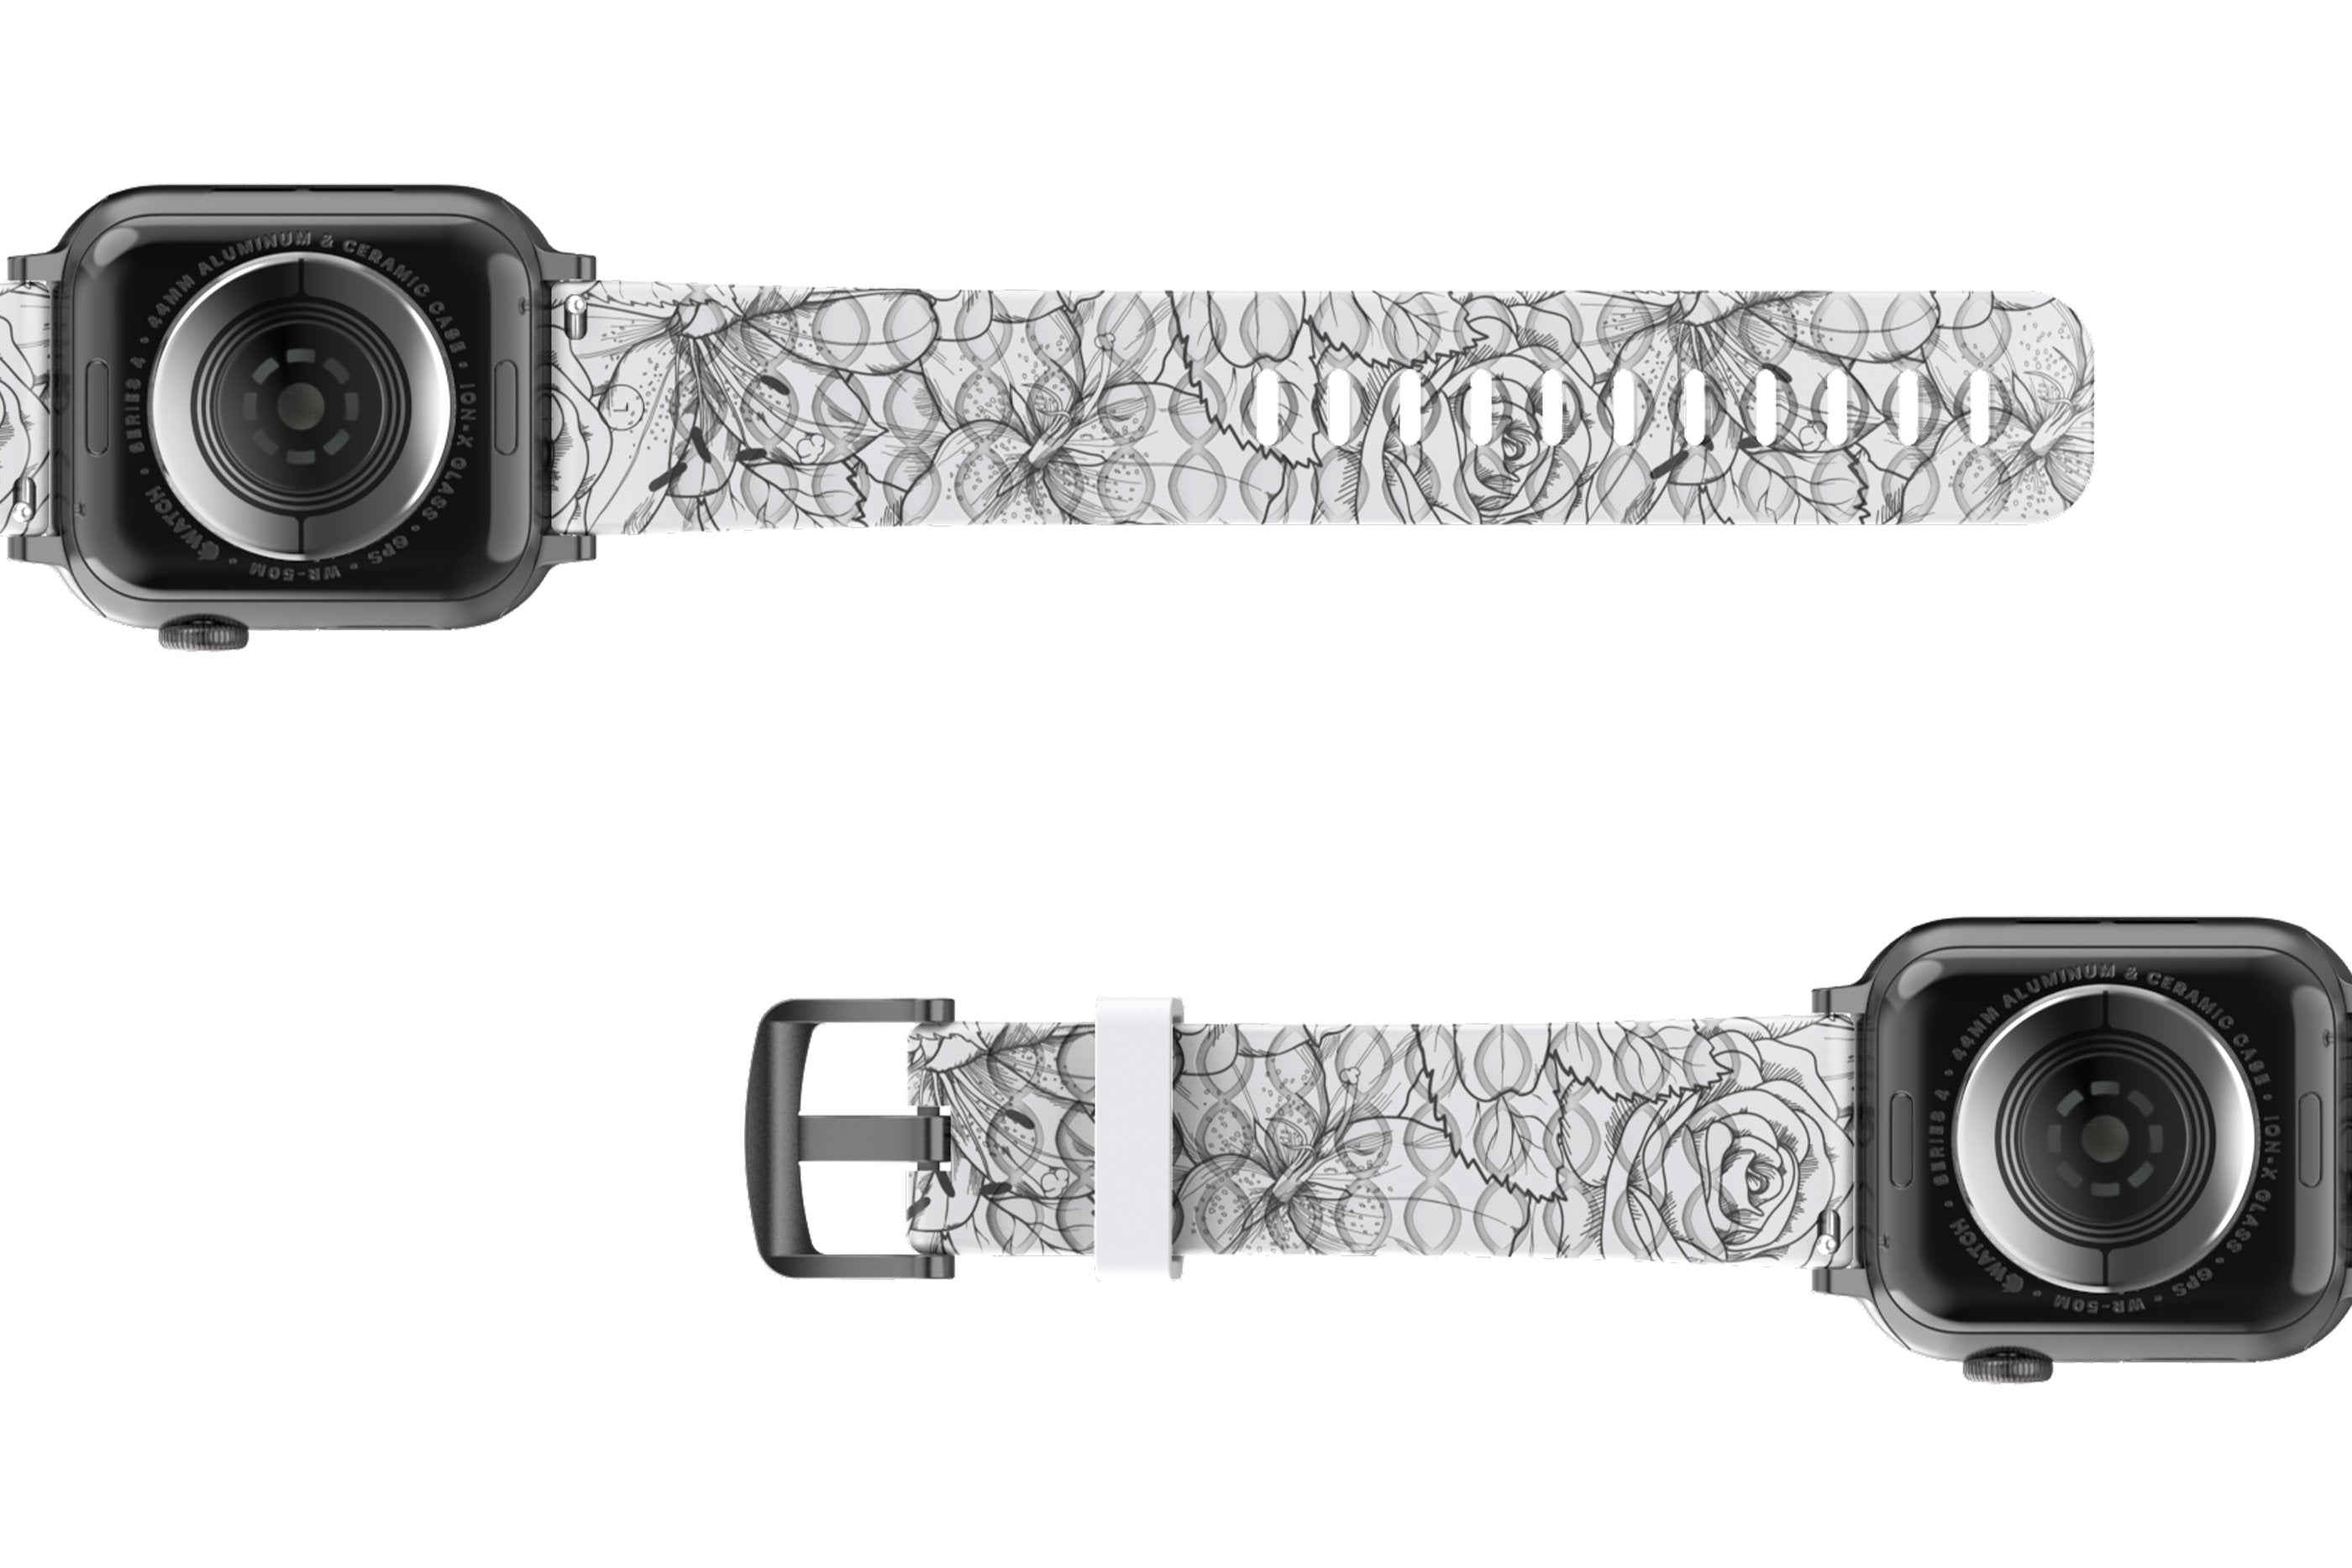 Winter Rose Apple Watch Band with gray hardware viewed bottom up